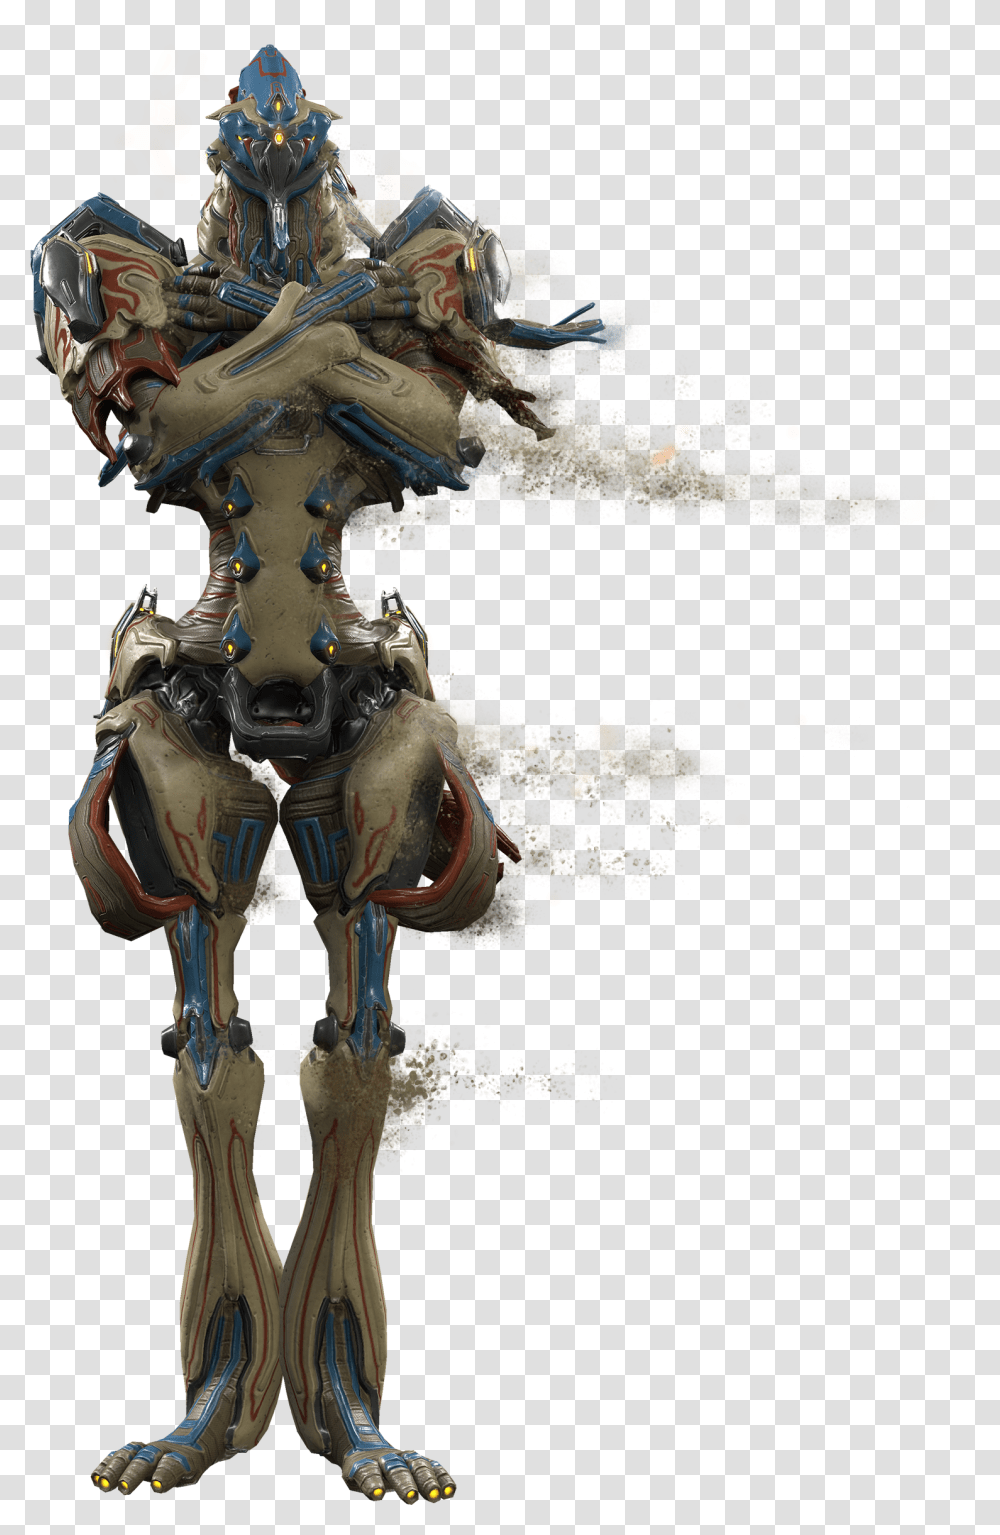 Inaros Is The Mummy Of Warframes Inaros Warframe, Pattern, Robot, Fractal, Ornament Transparent Png